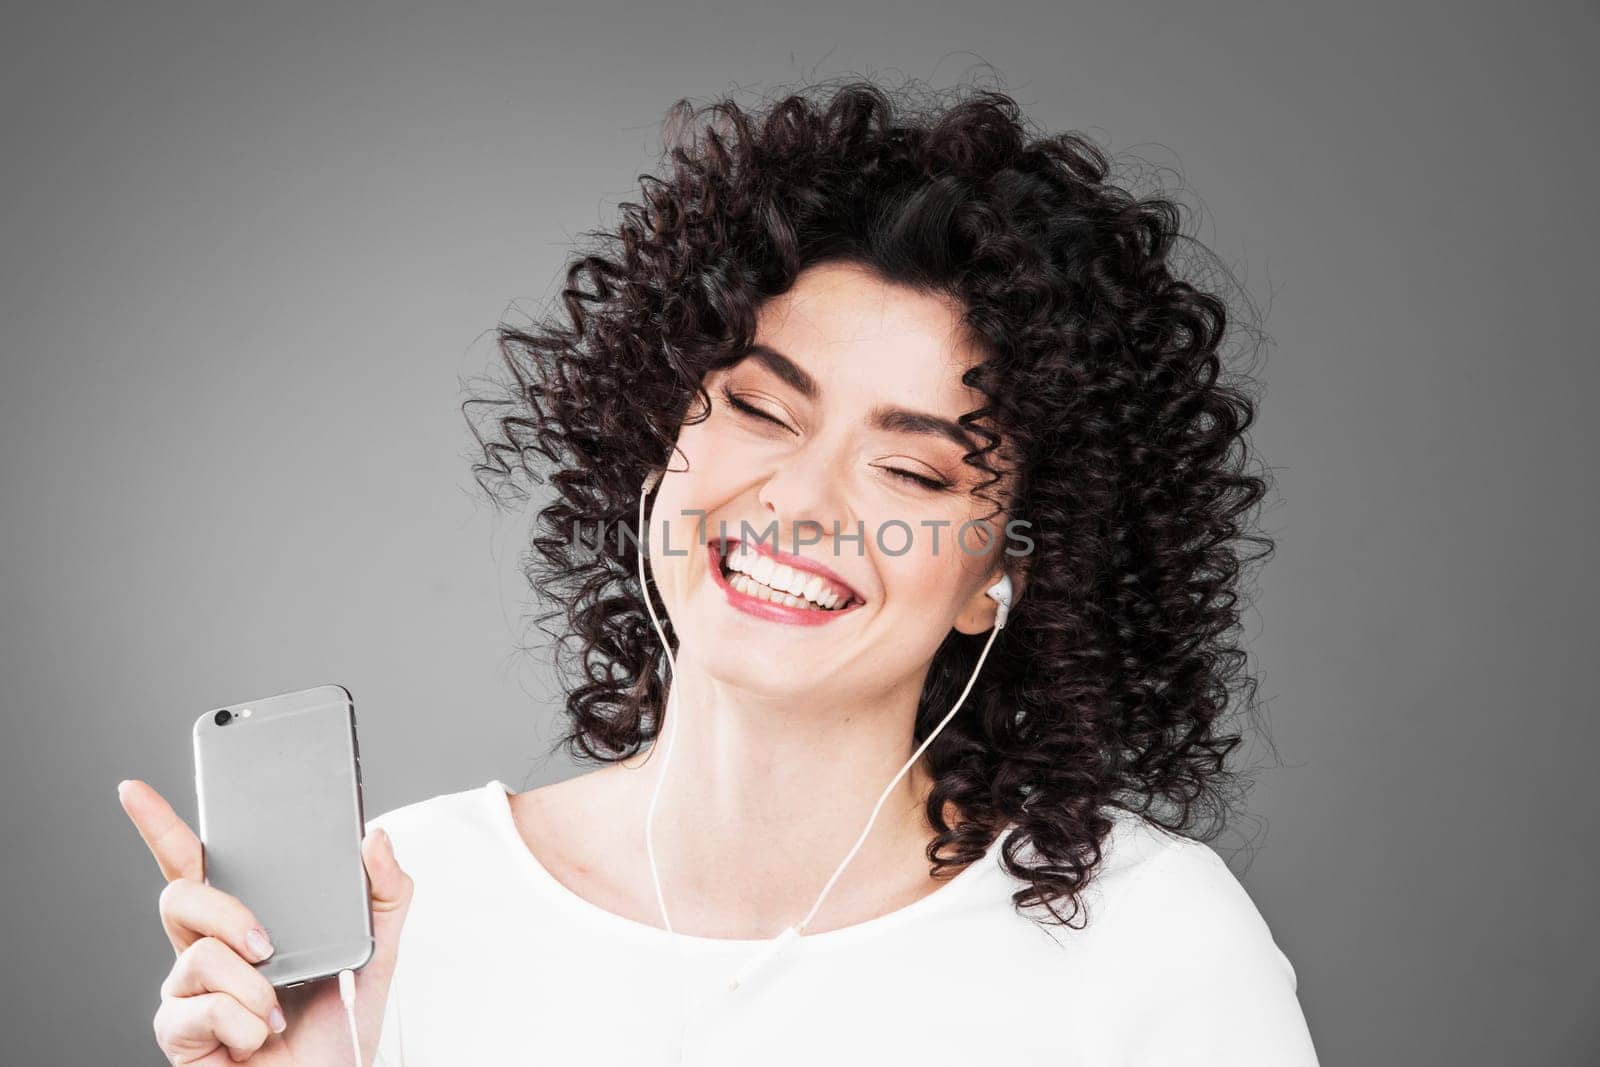 Woman in white dancing with earphones headphones listening to music on phone, gray background